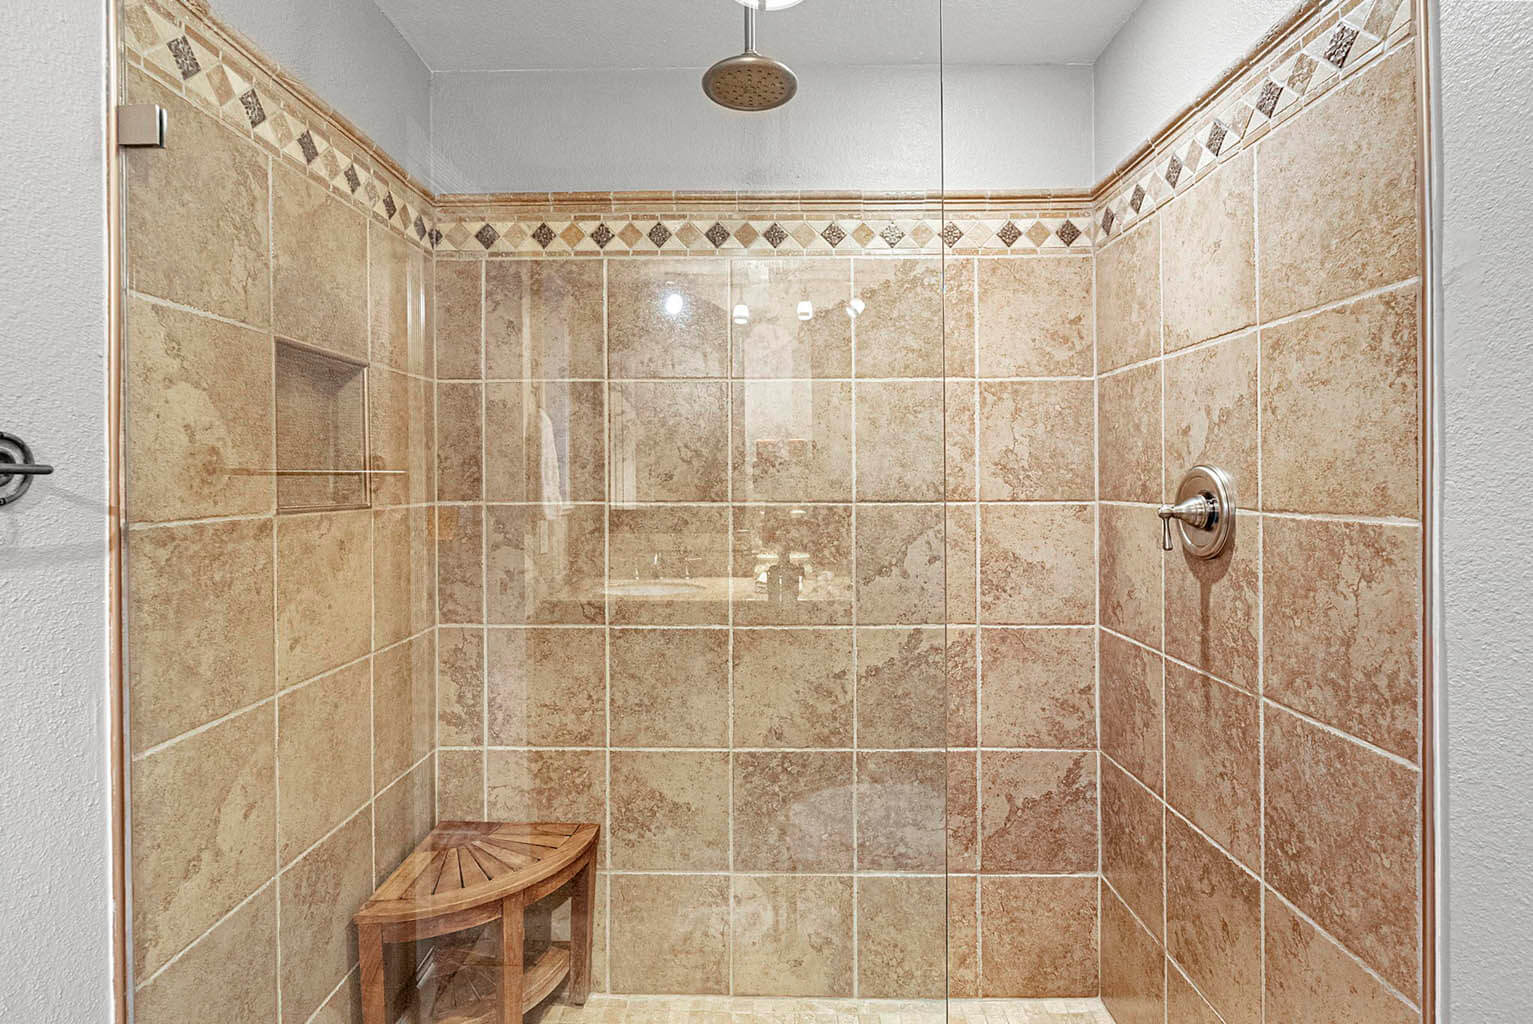 Primary bathroom with shower